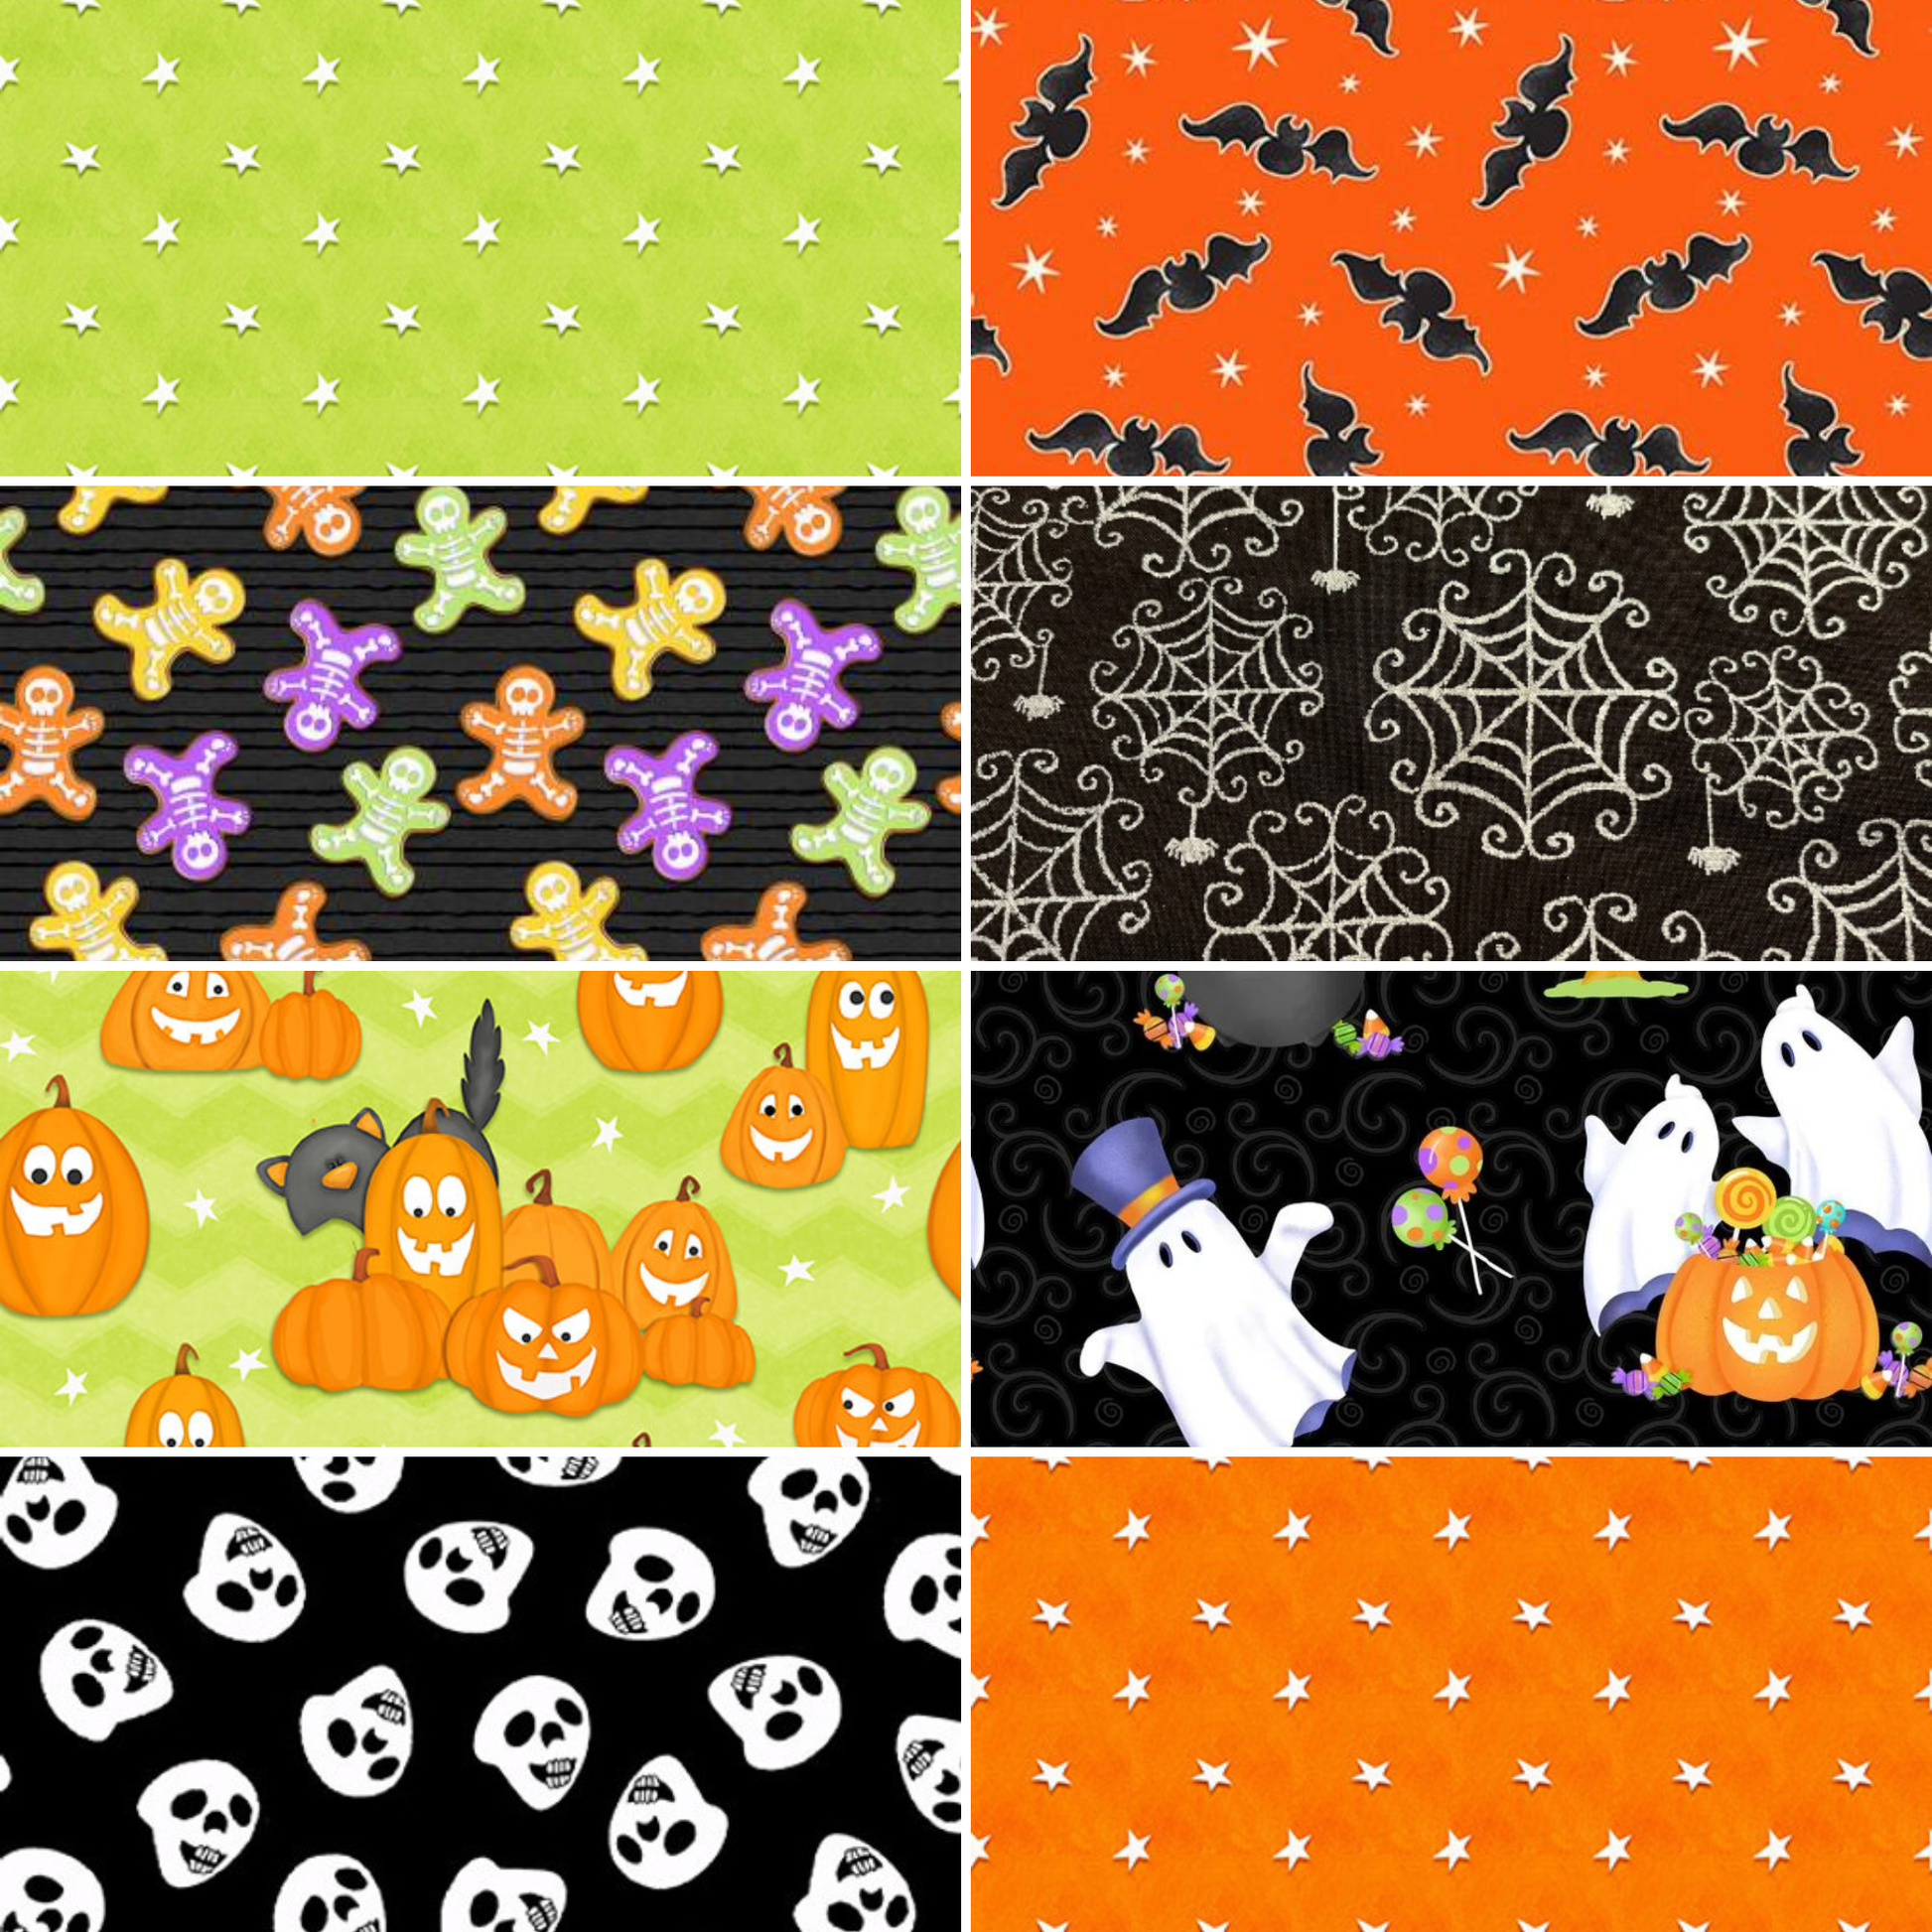 Halloween Sparkle & Glow in the Dark Fabric Bundle by Henry Glass